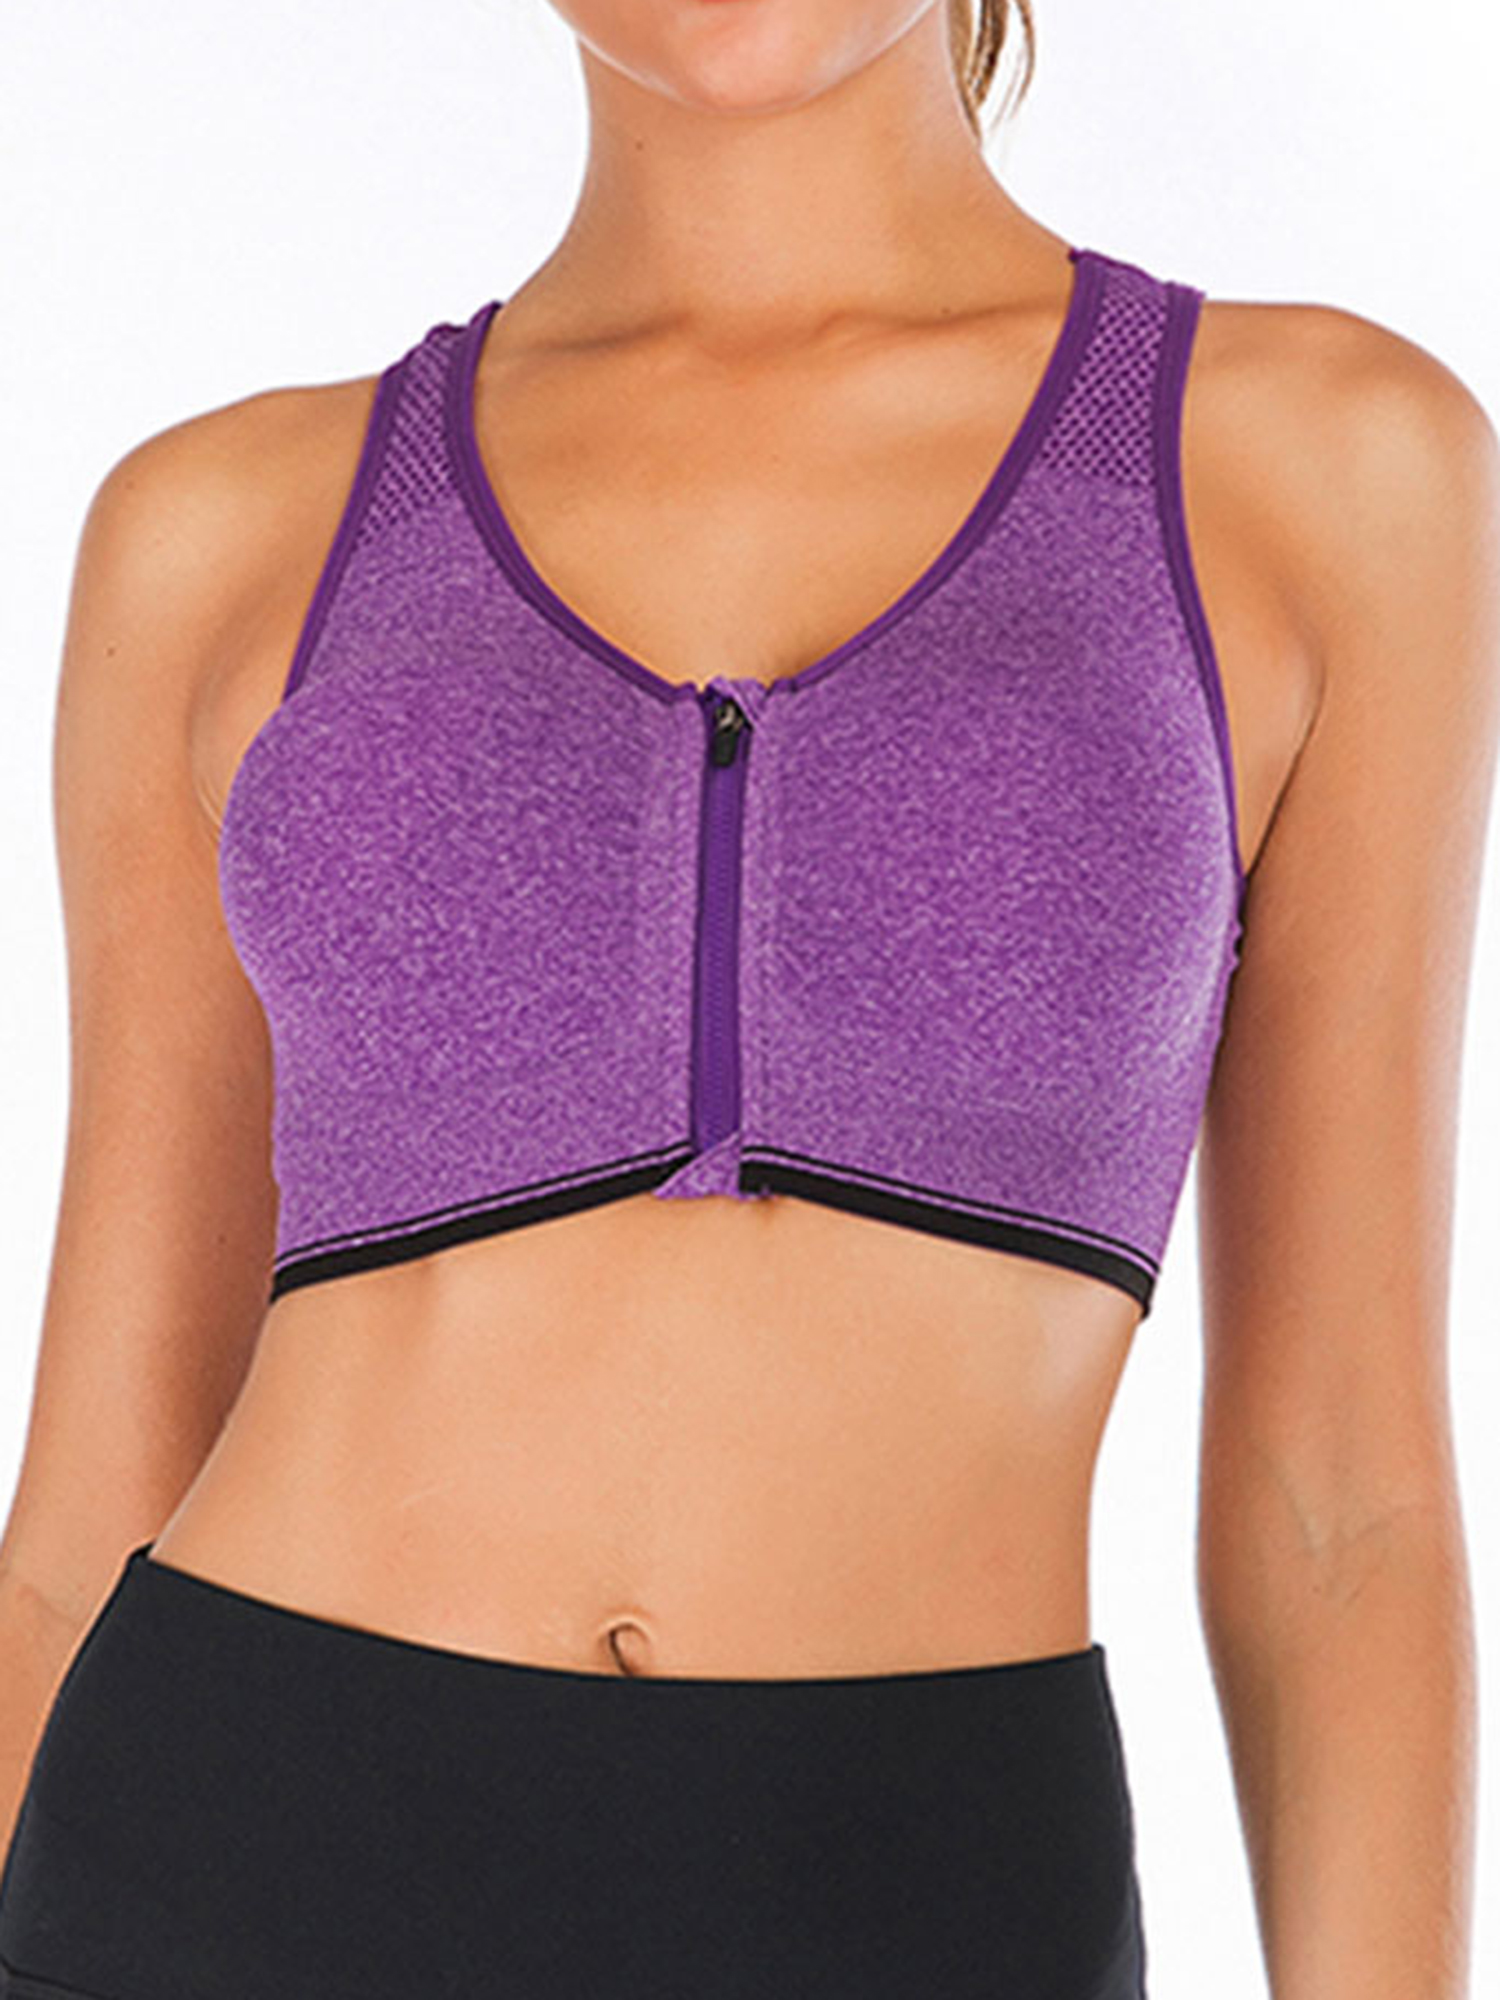 FUTATA Women's Front Zipper Sports Bra, Wireless Post-Op Bra Active Yoga Sports Bra For Gym Workout Running With Removable Pads, Available In Ten Colors S-2XL - image 1 of 8